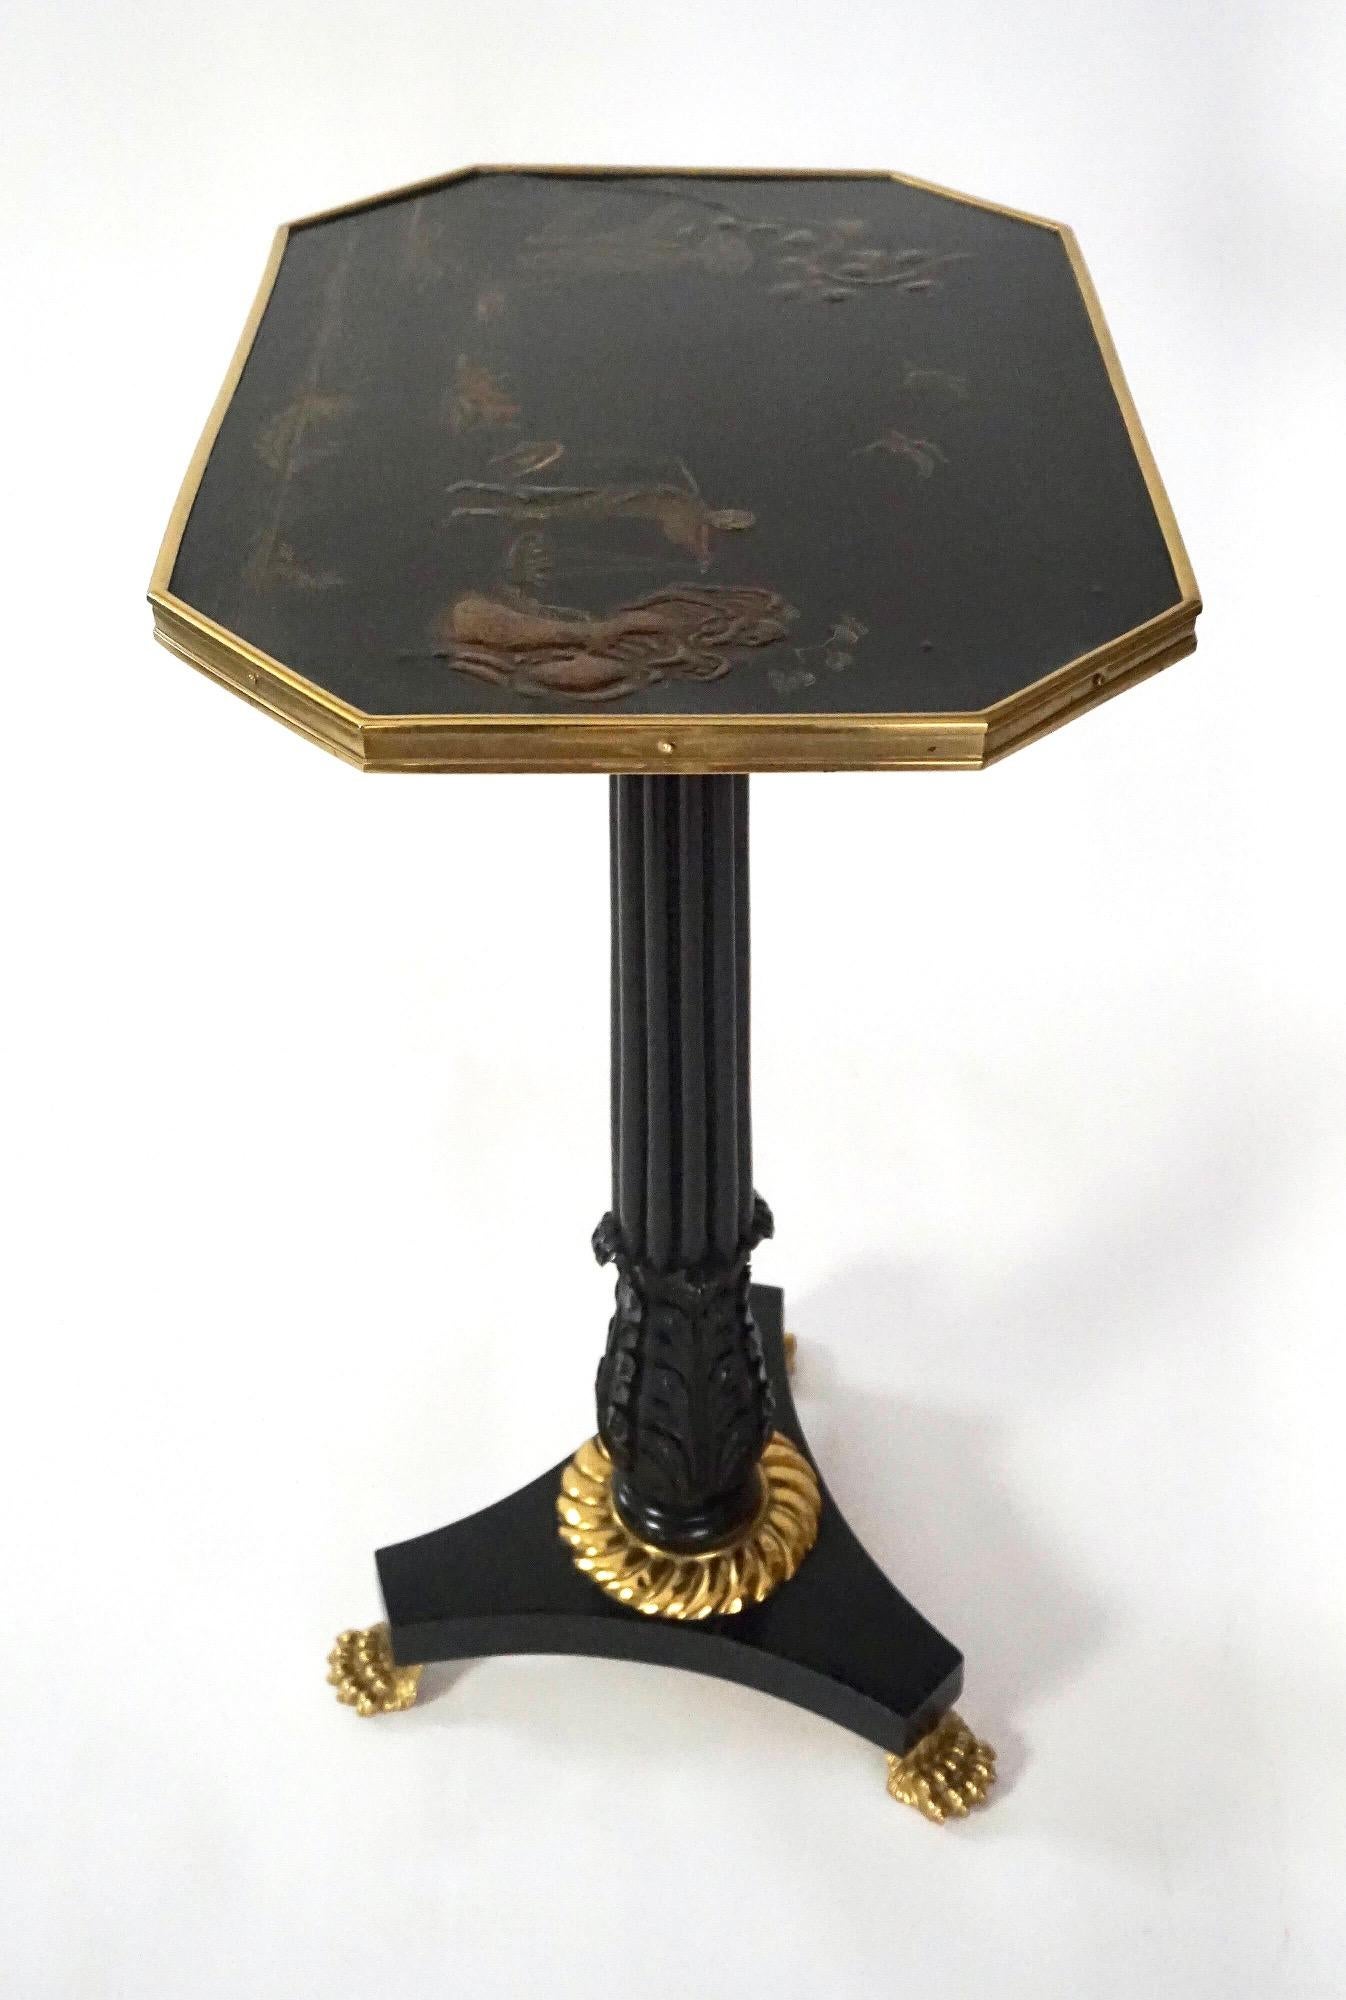 English Regency Chinoiserie Lacquer Top Ebonized Brass Mounted Stand, circa 1820 In Good Condition For Sale In Kinderhook, NY